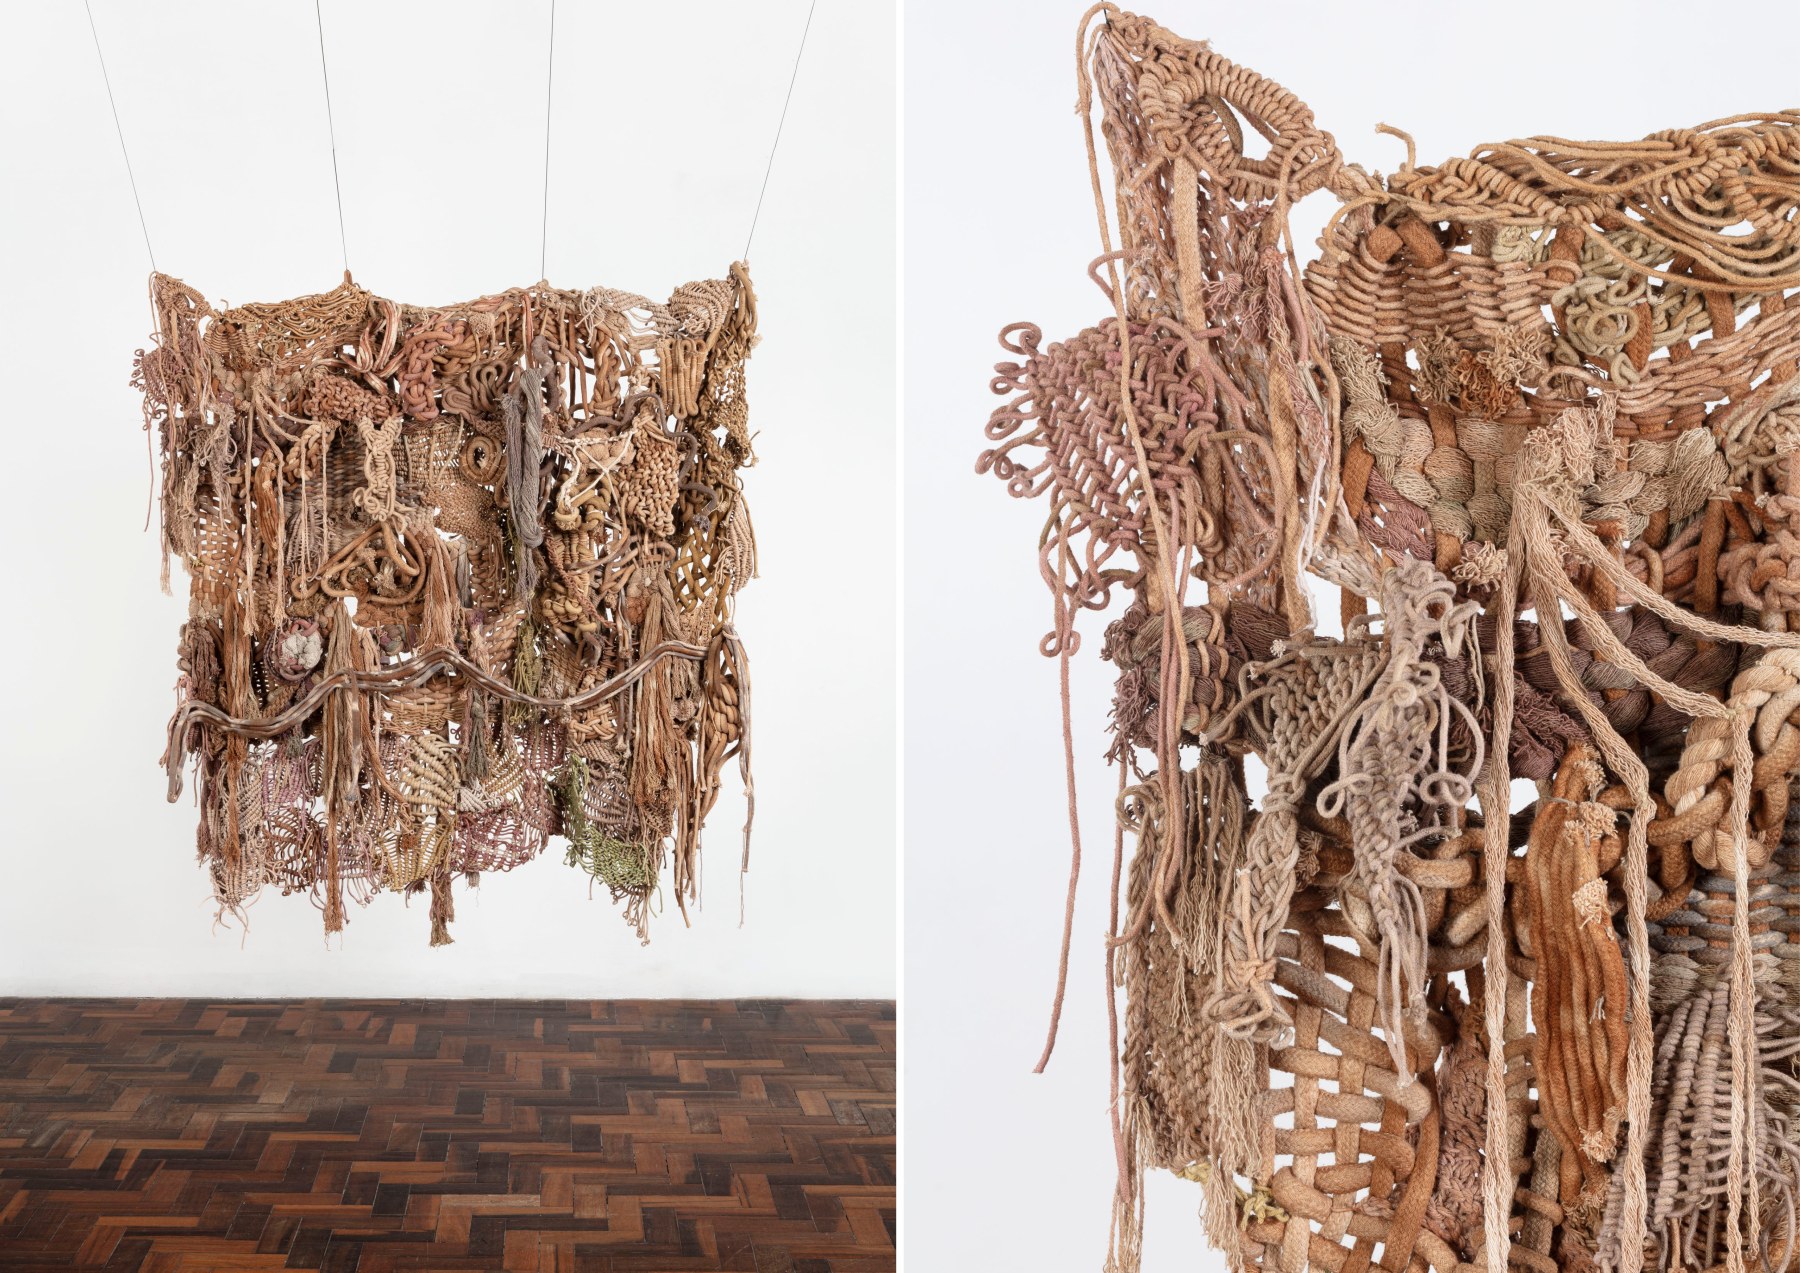 Laura Lima | How To Eat The Sun and The Moon - Goodman Gallery Johannesburg - Viewing Room - Goodman Gallery Viewing Rooms